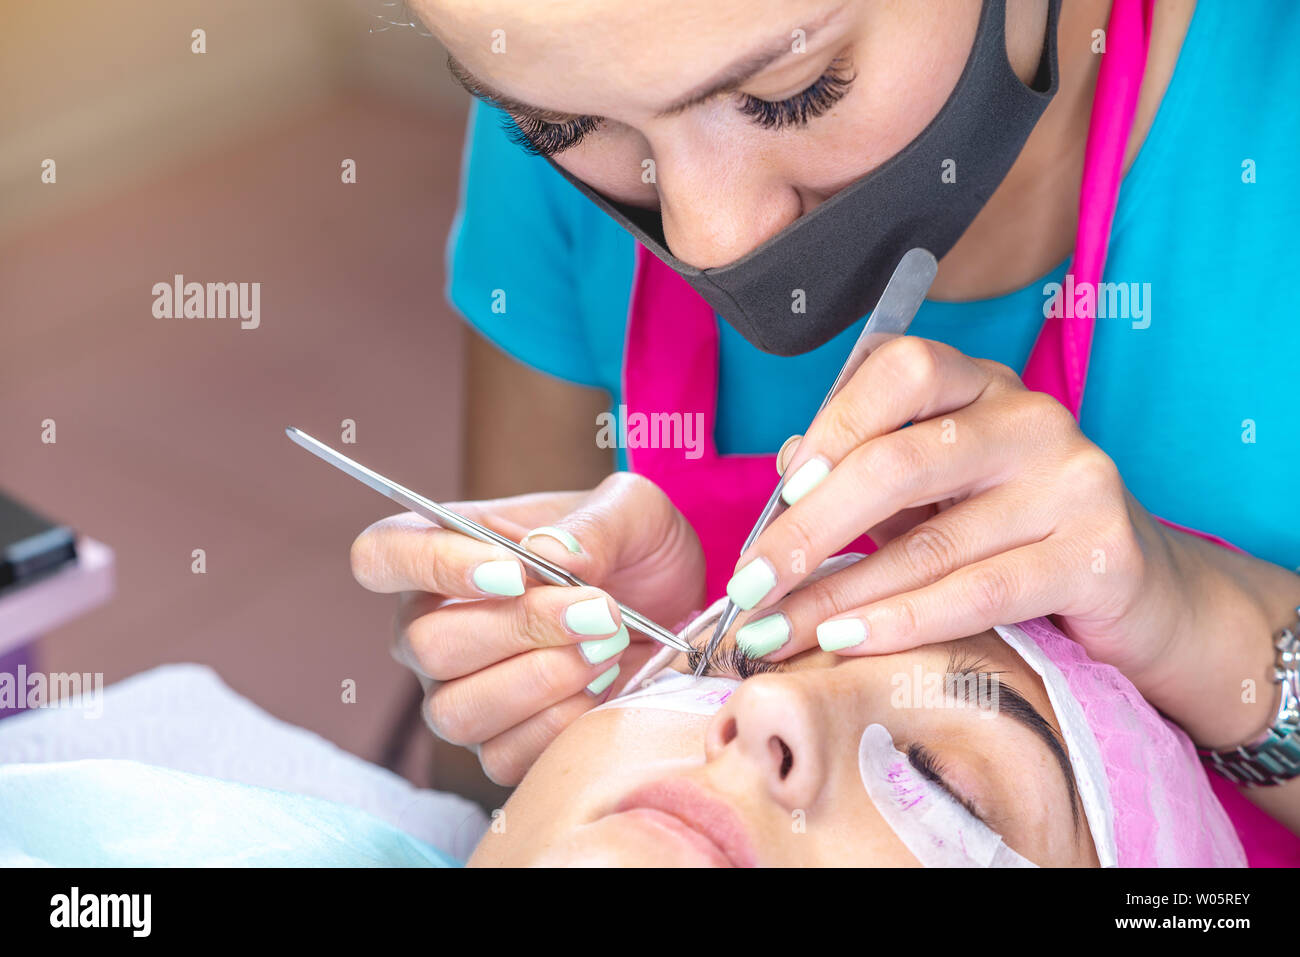 Woman master in the beauty salon work on eyelash extension to the client. Concept of profession in the field of beauty services Stock Photo